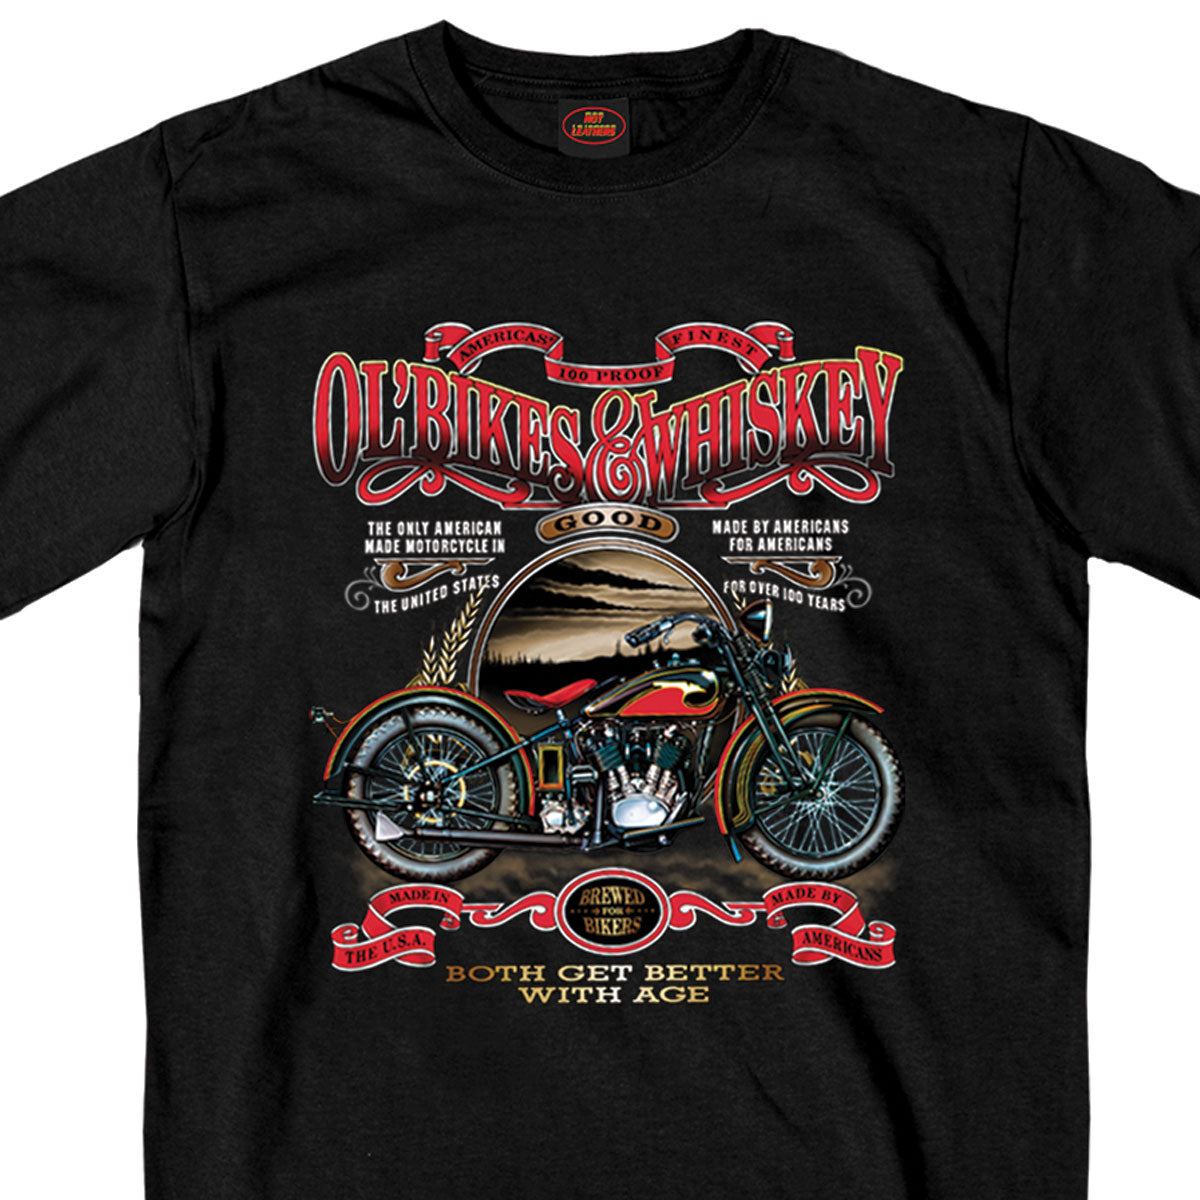 SS OL' BIKES & WHISKEY – Hot Leathers